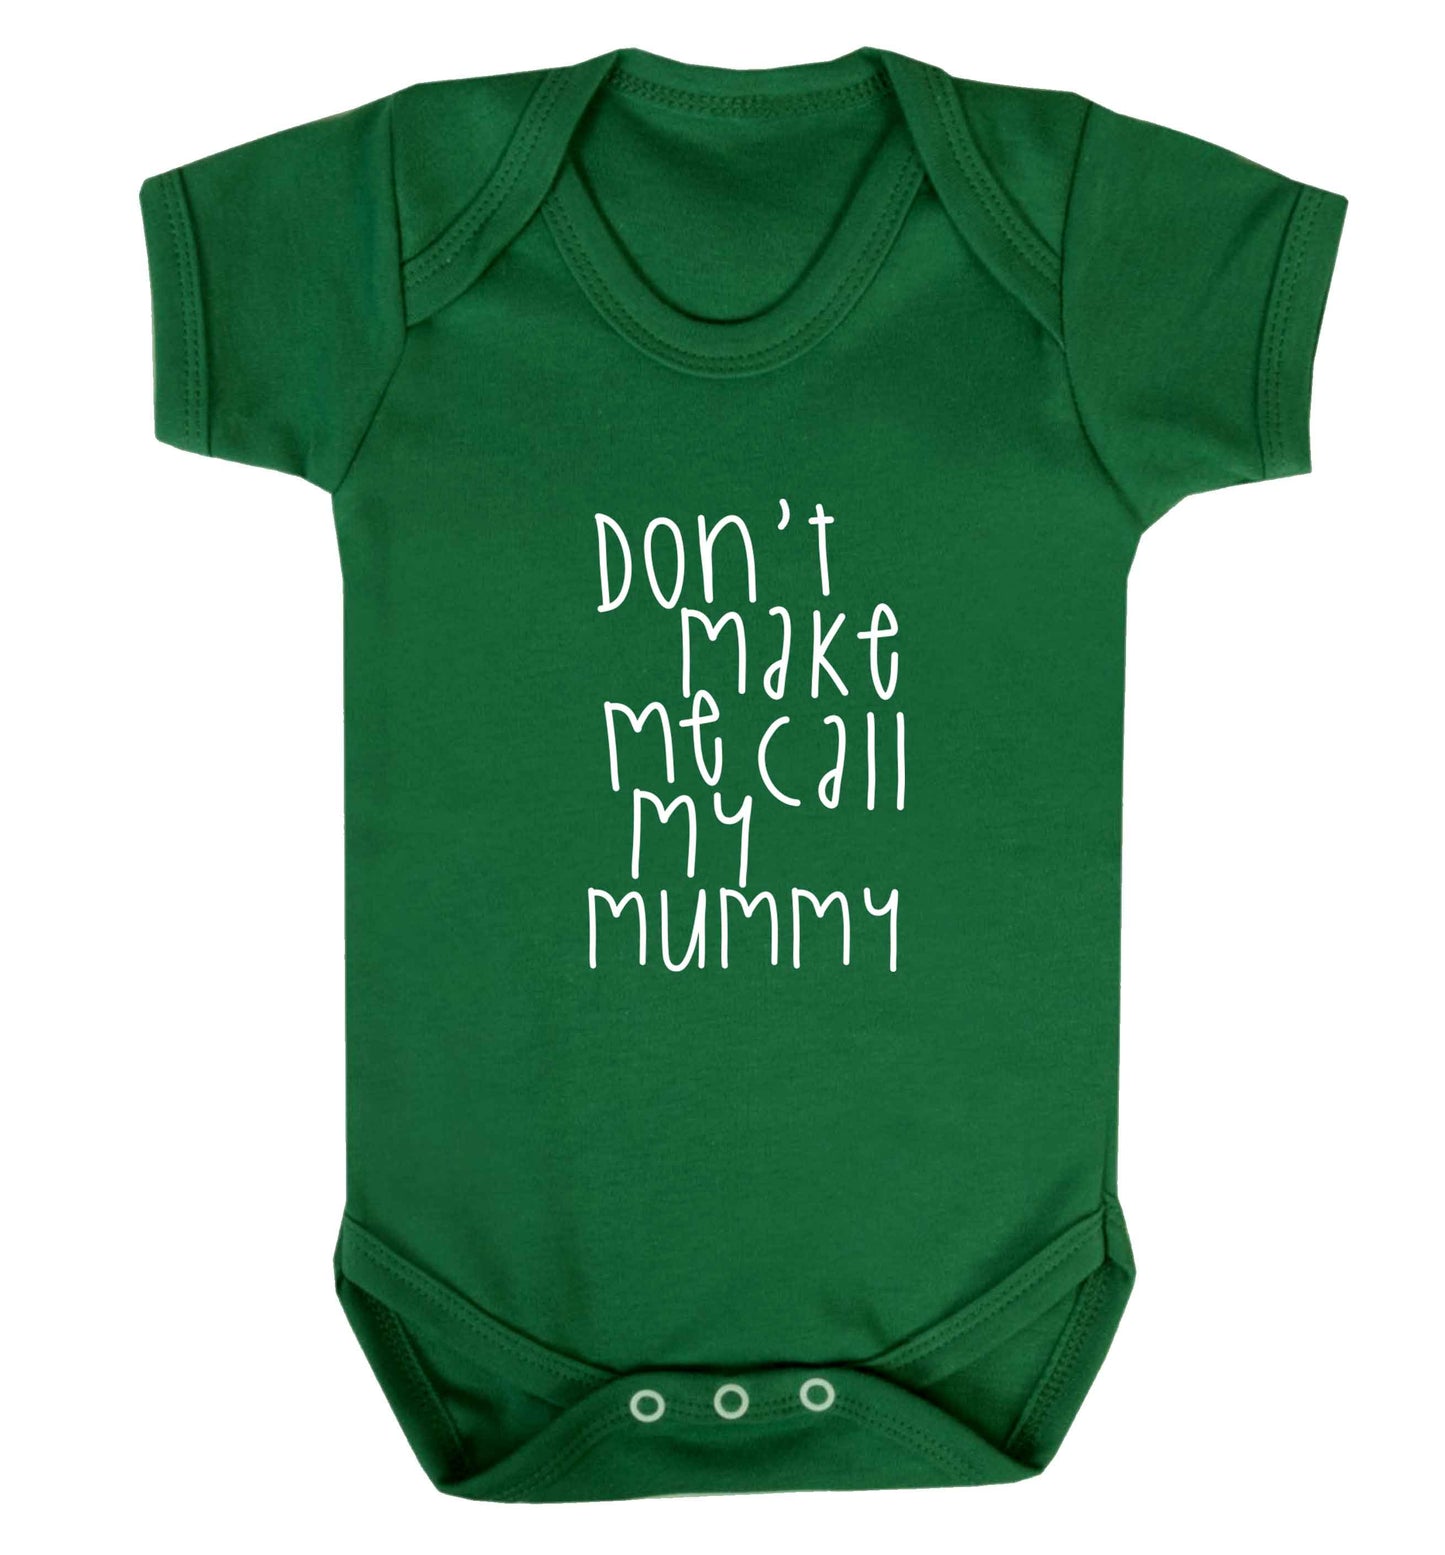 Don't make me call my mummy baby vest green 18-24 months